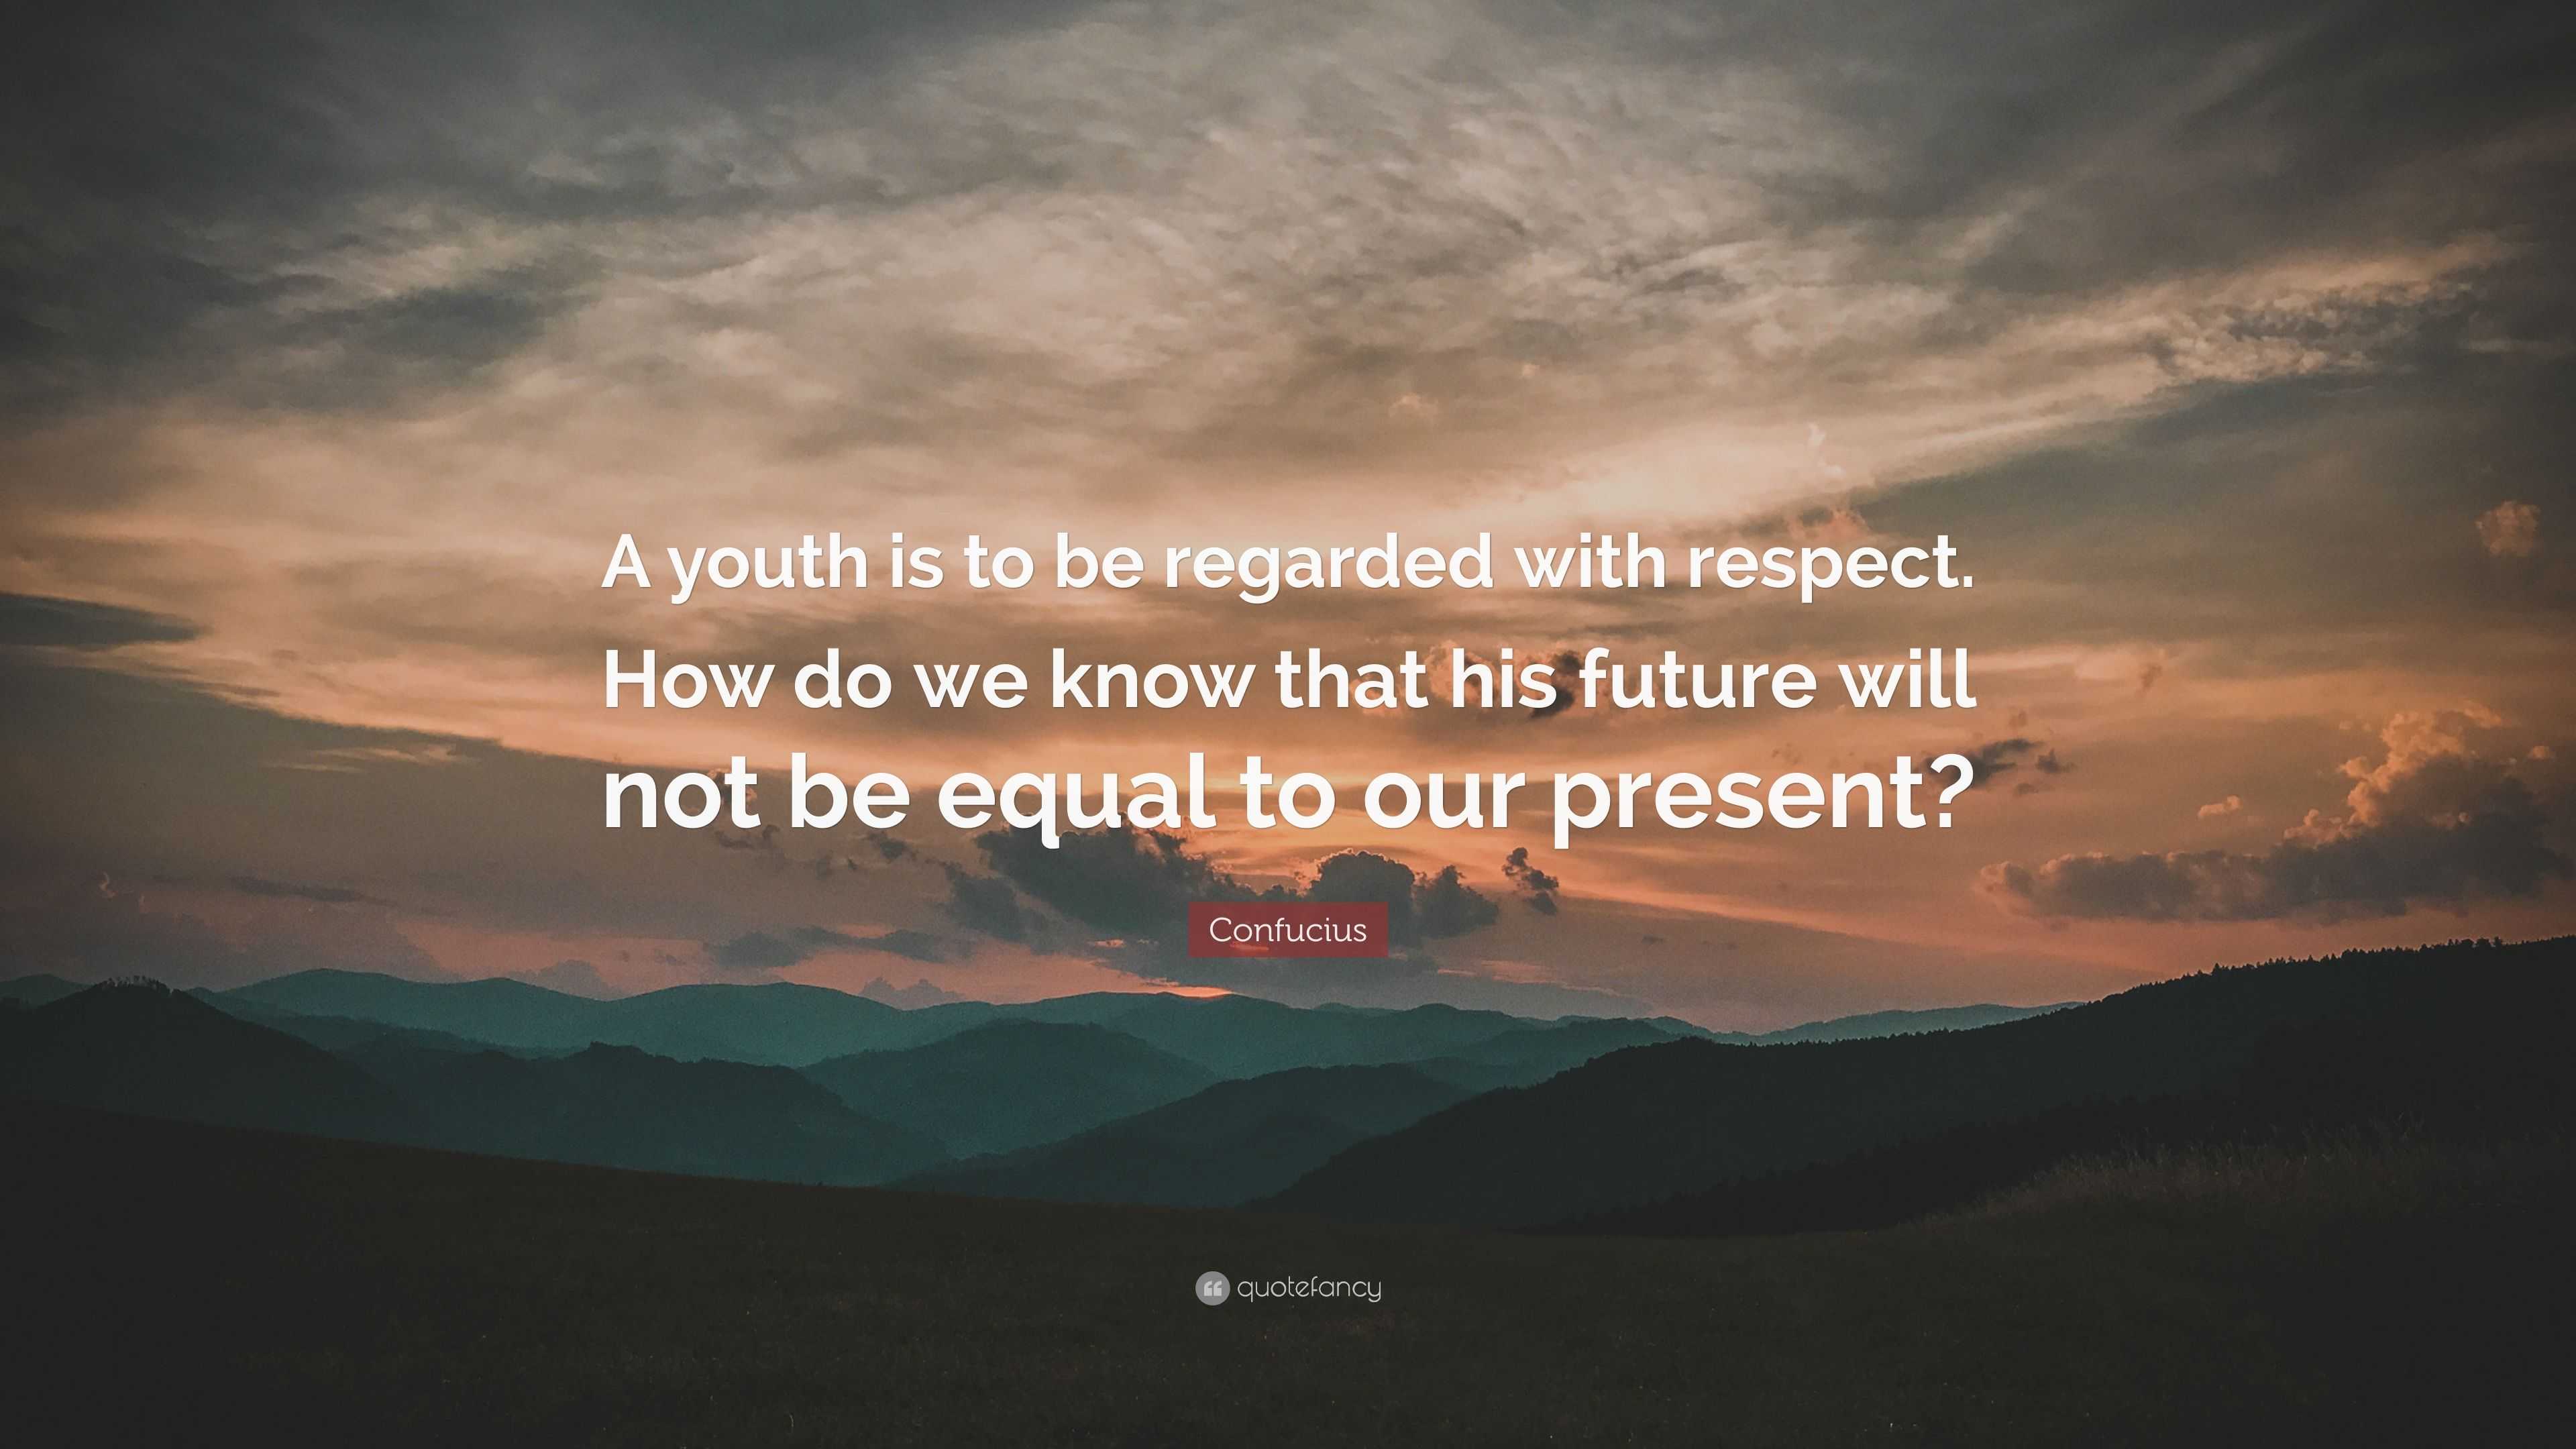 Confucius Quote “A youth is to be regarded with respect